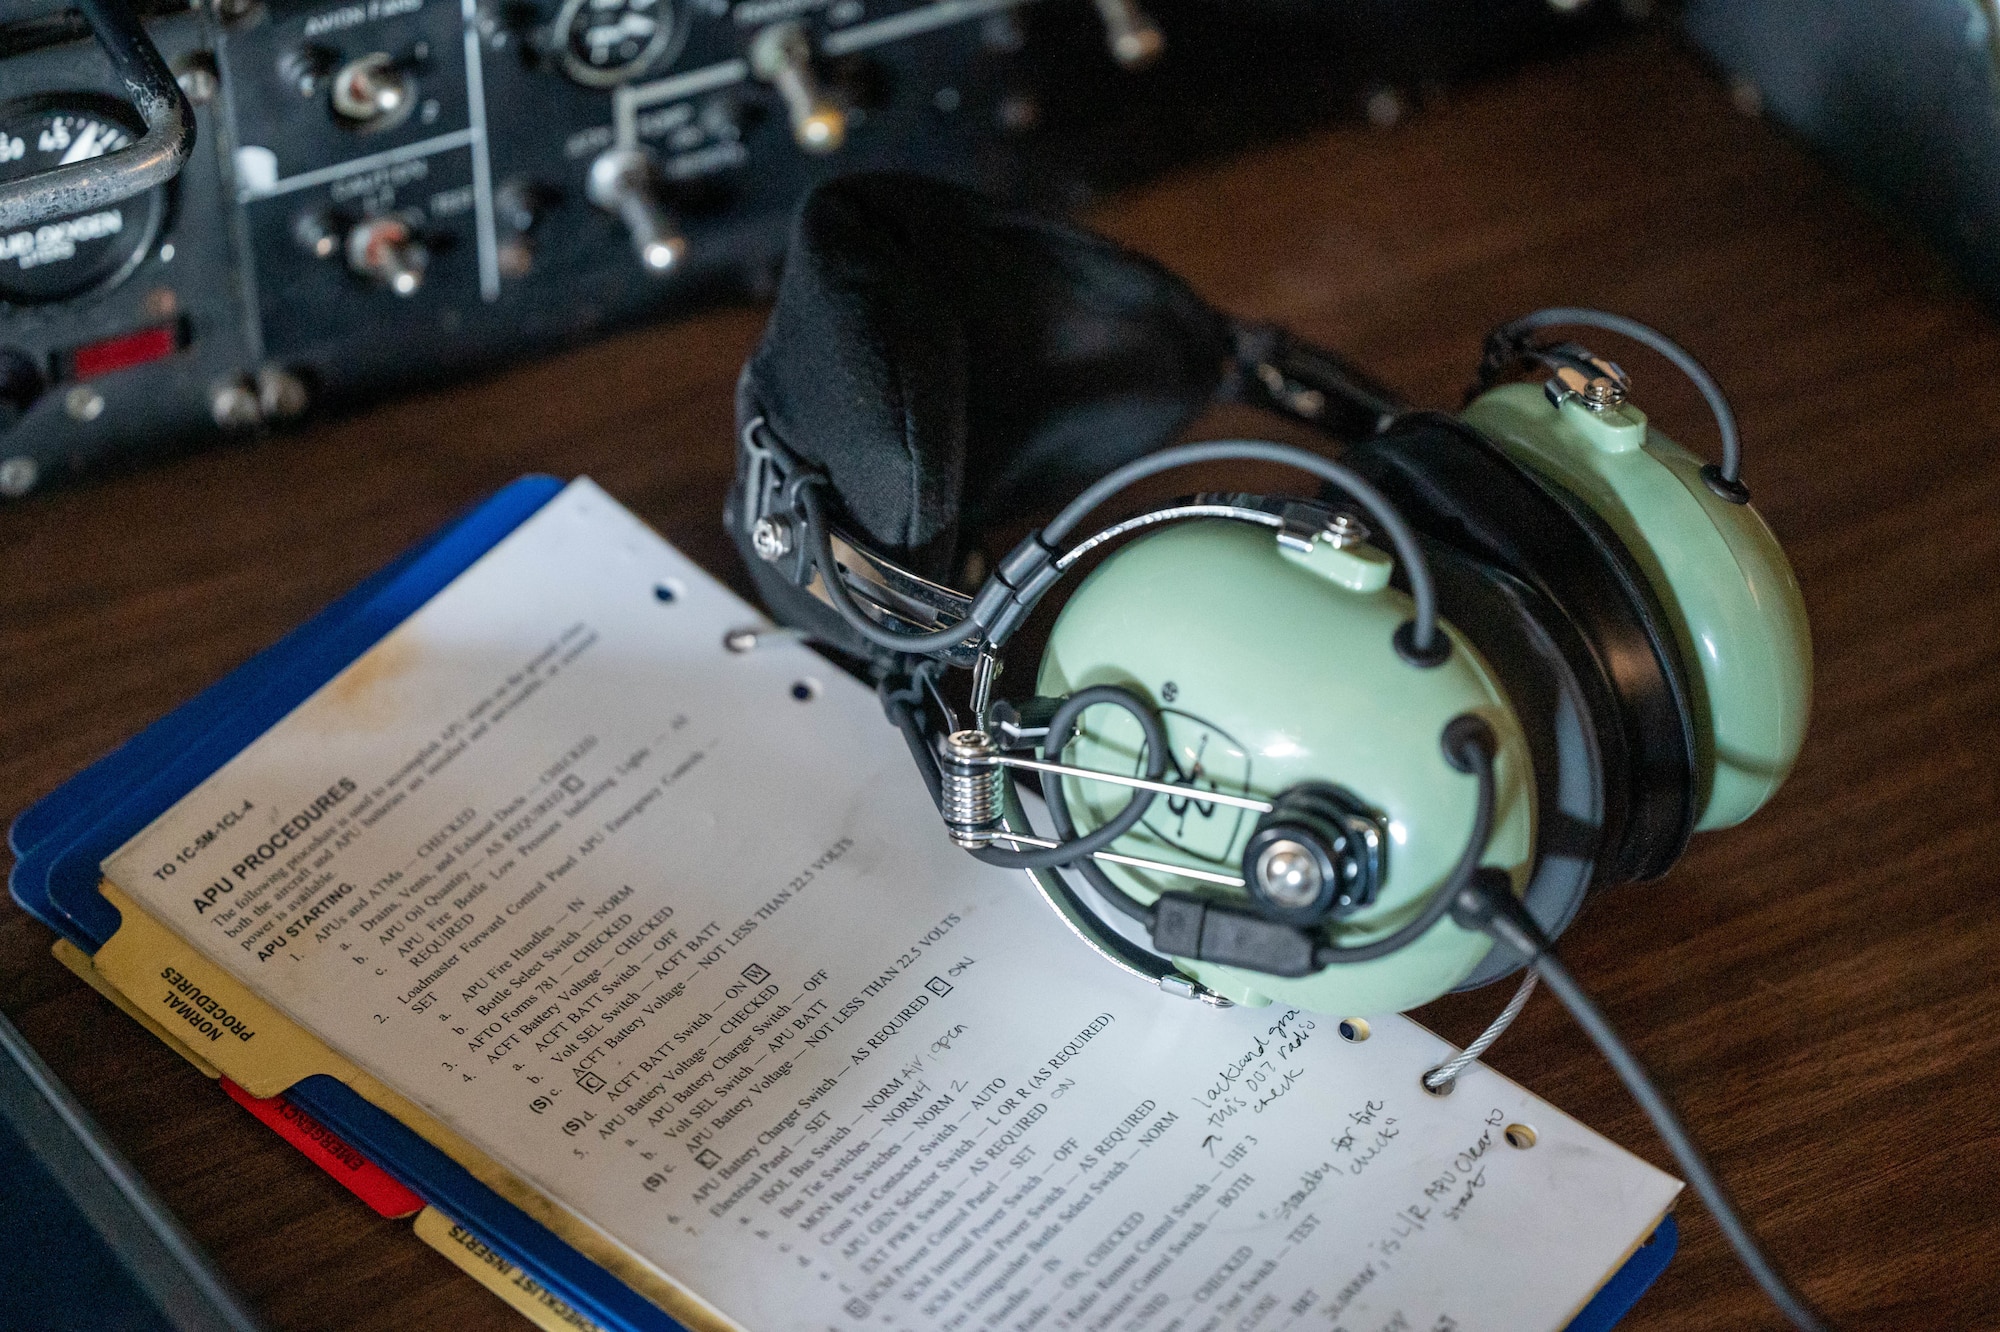 An auxiliary power unit checklist and an aviation headset rest on the flight deck of a Dover Air Force Base C-5M Super Galaxy during a Major Command Service Tail Trainer at Holloman AFB, New Mexico, June 8, 2021. Following an initiative from Air Mobility Command, MSTTs have been in the training plan of the 9th Airlift Squadron since early 2021 to expedite upgrade and qualification training for C-5M Super Galaxy loadmasters and flight engineers. Of the 350 tasks needed to be a fully qualified loadmaster, roughly half can be completed during an MSTT. (U.S. Air Force photo by Senior Airman Faith Schaefer)